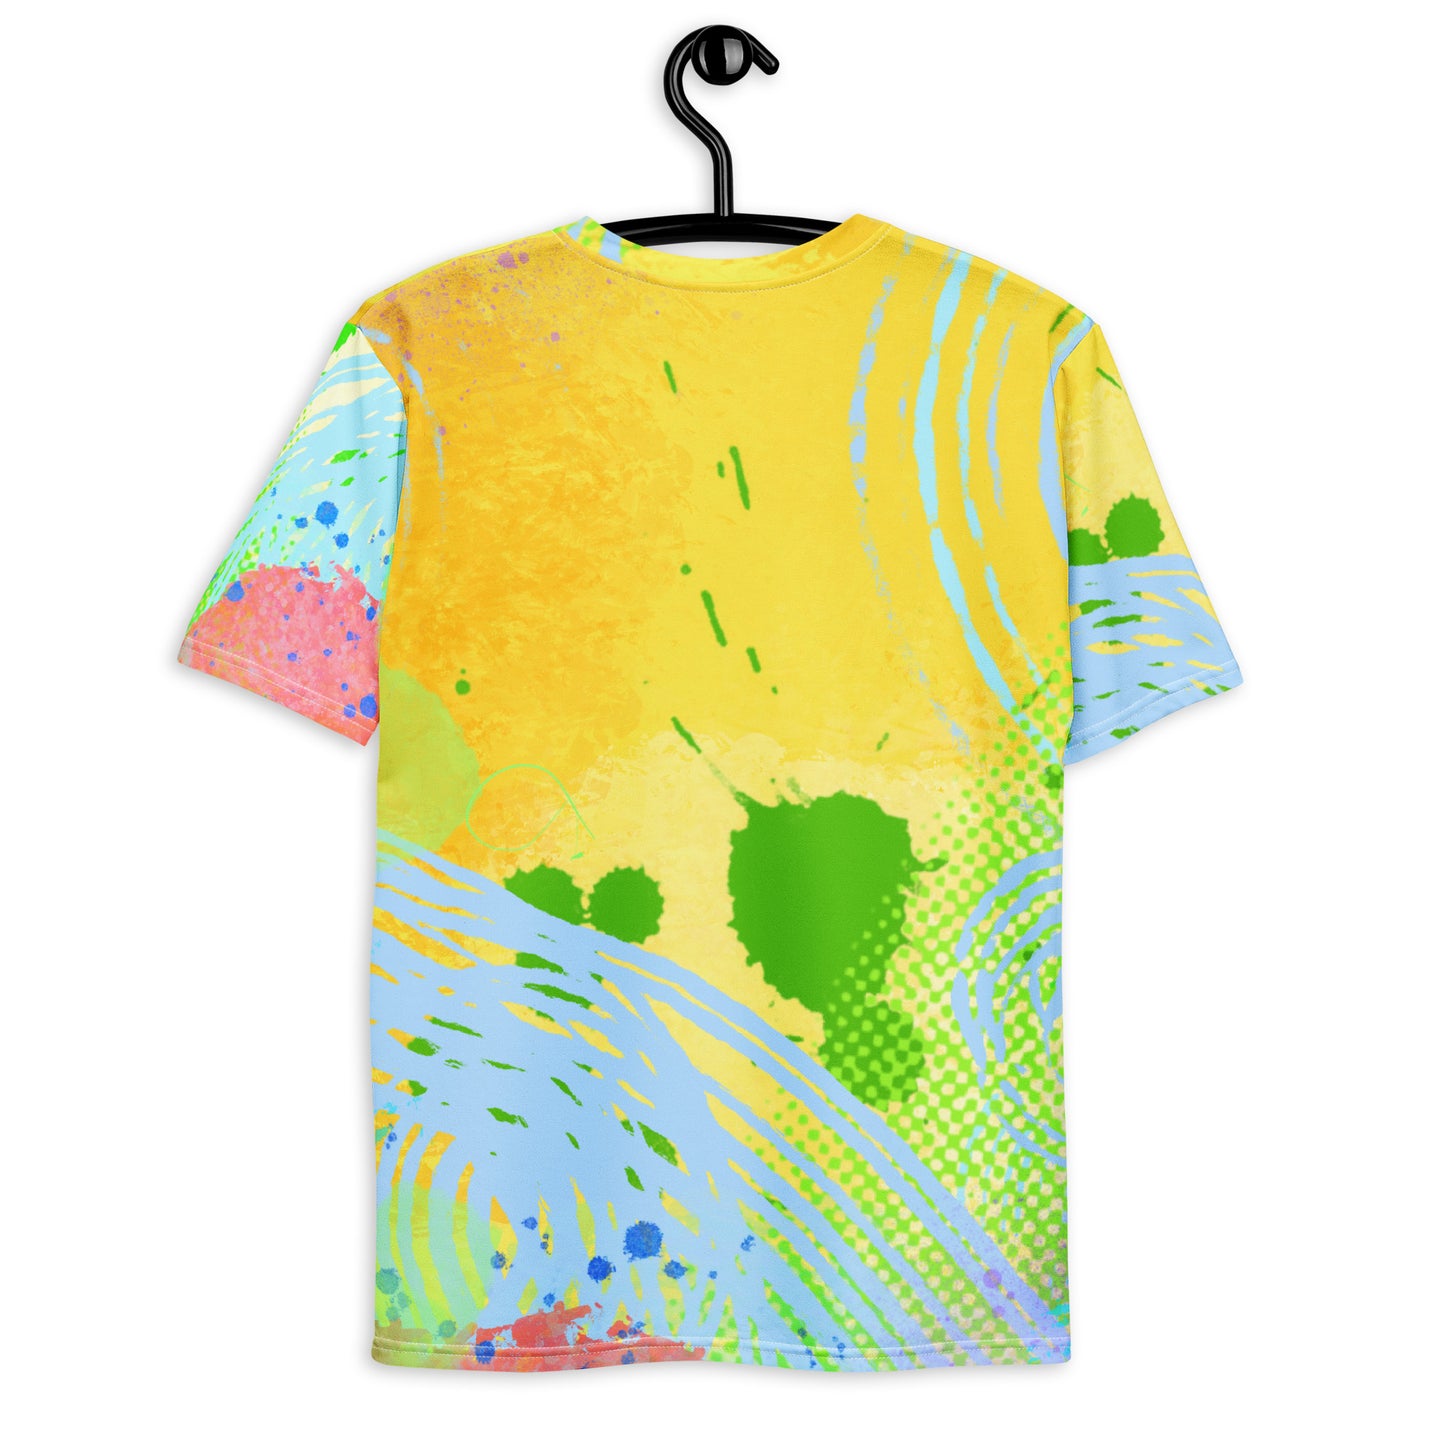 "SHAMAN" by pierre bennu All-over Print T-shirt